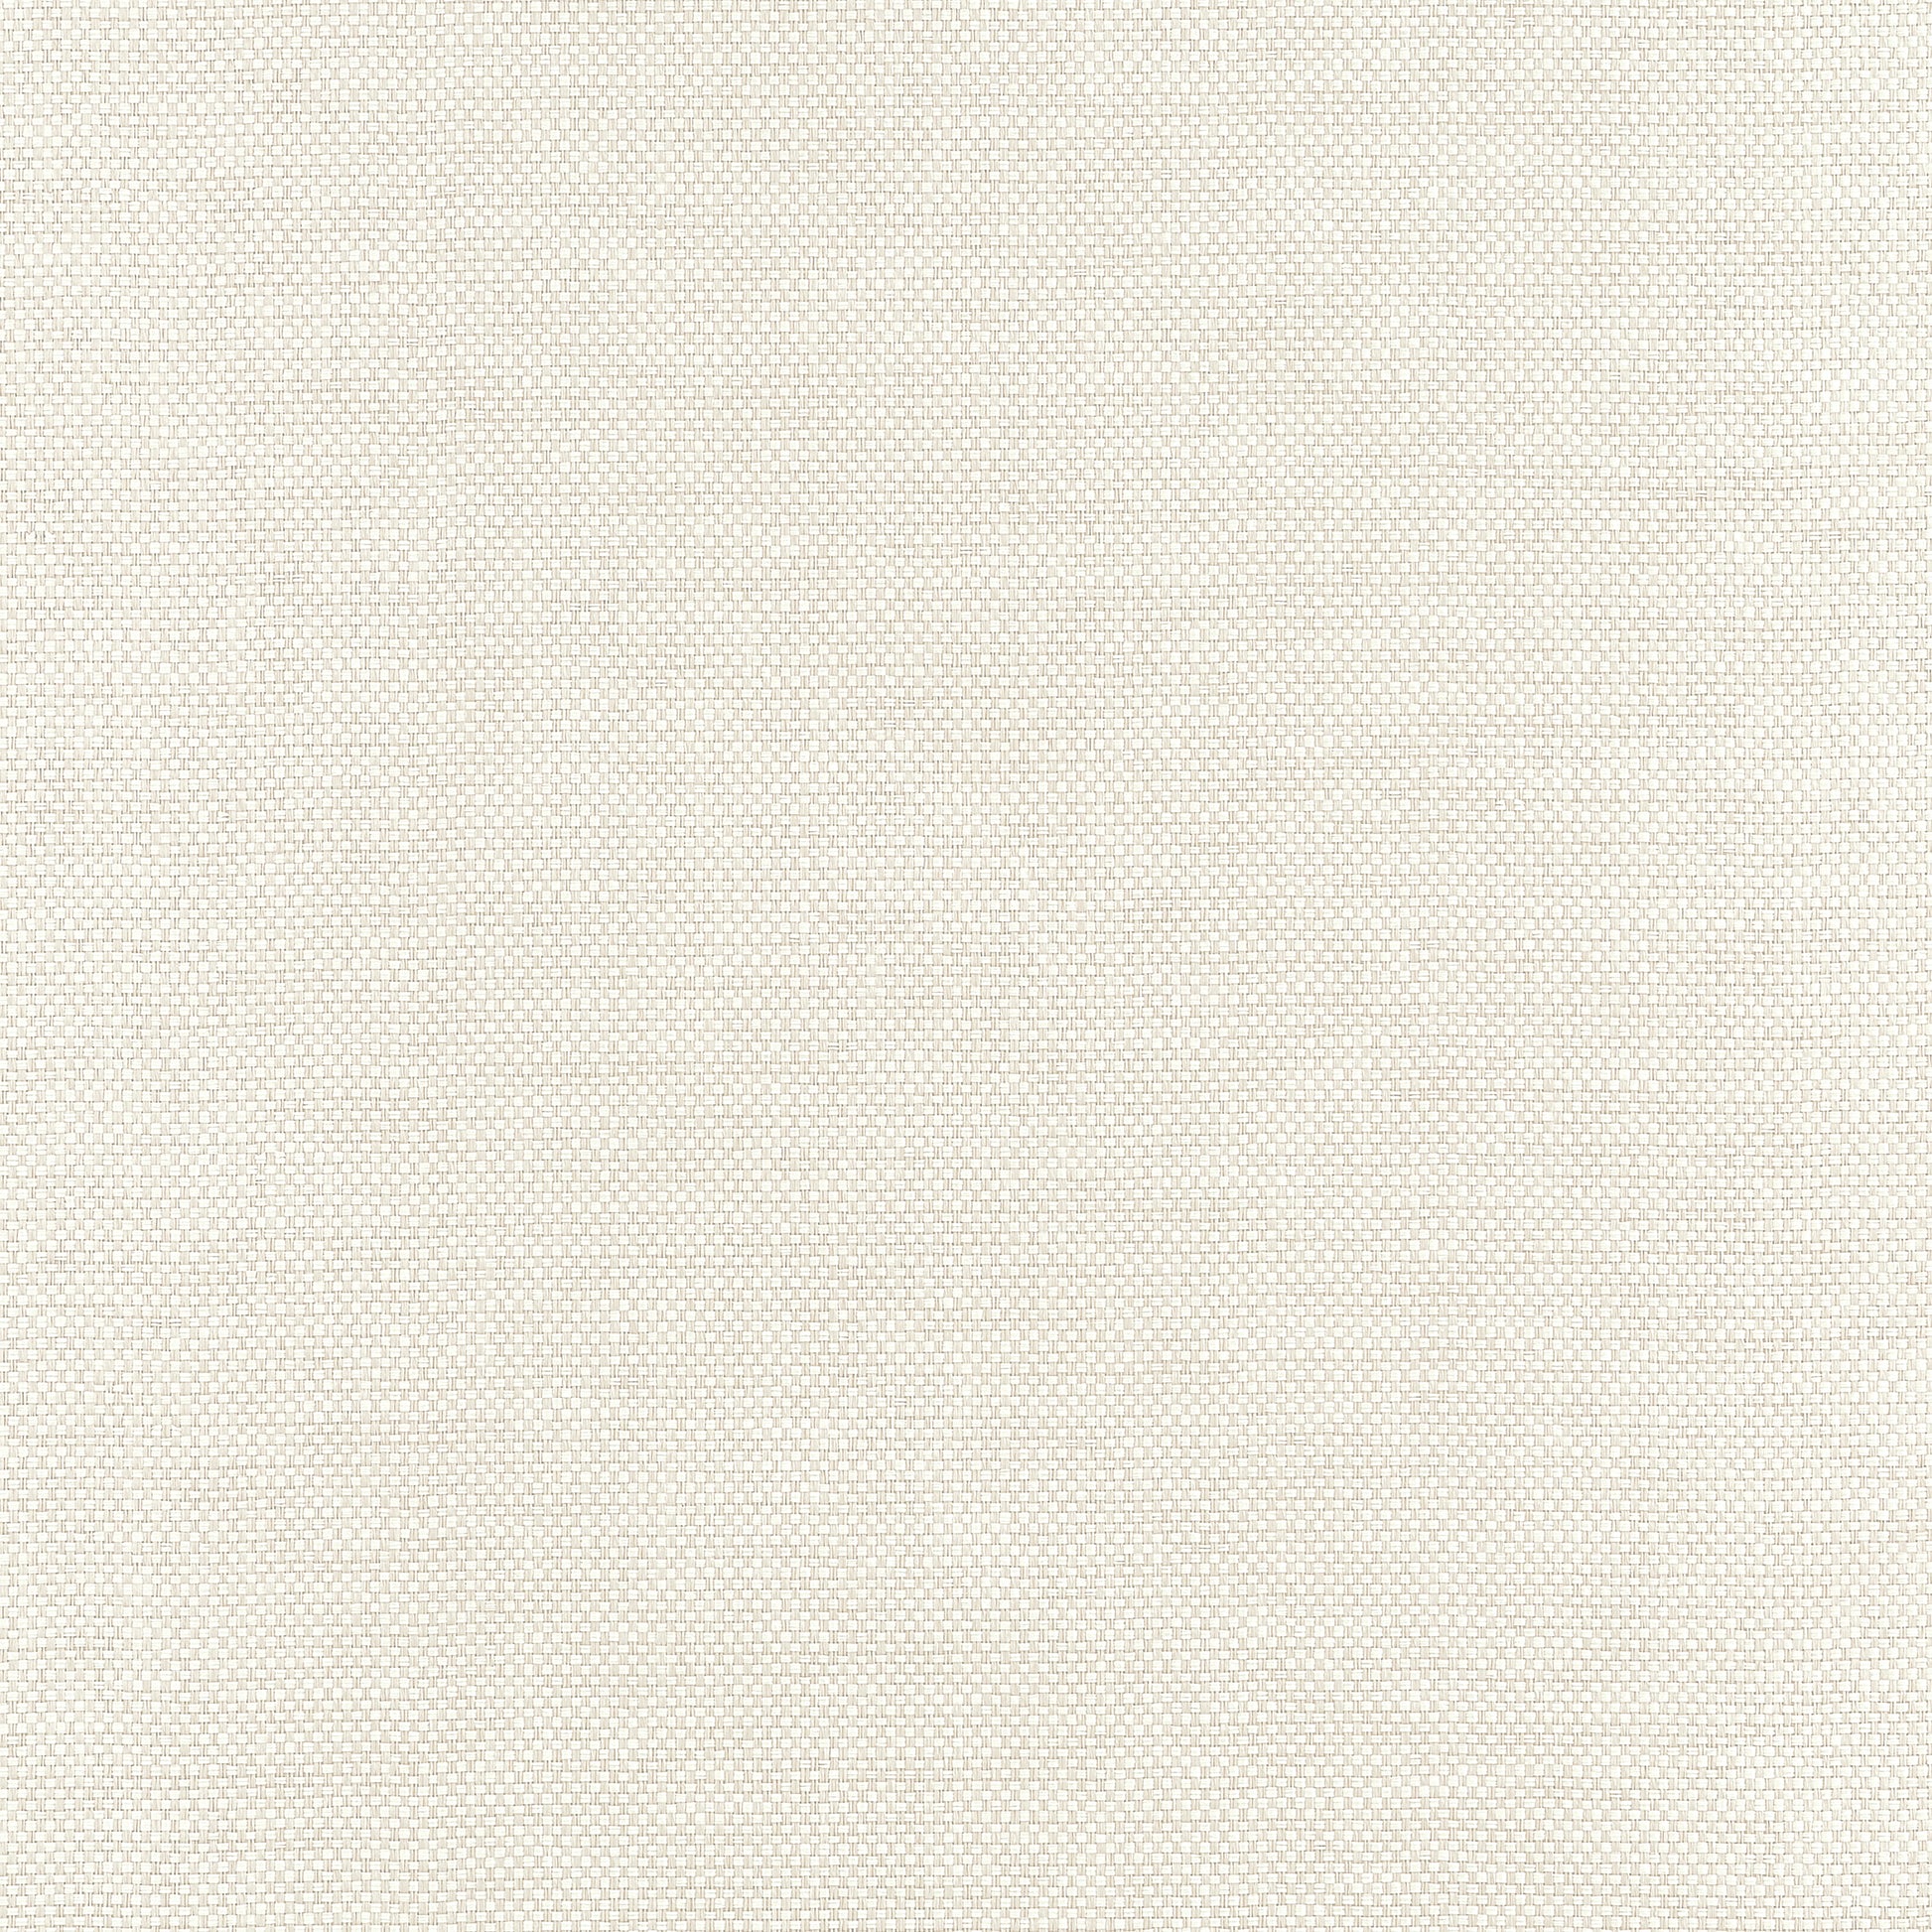 Purchase Thibaut Wallpaper Item# T19680 pattern name Clarkson Weave color Cream. 